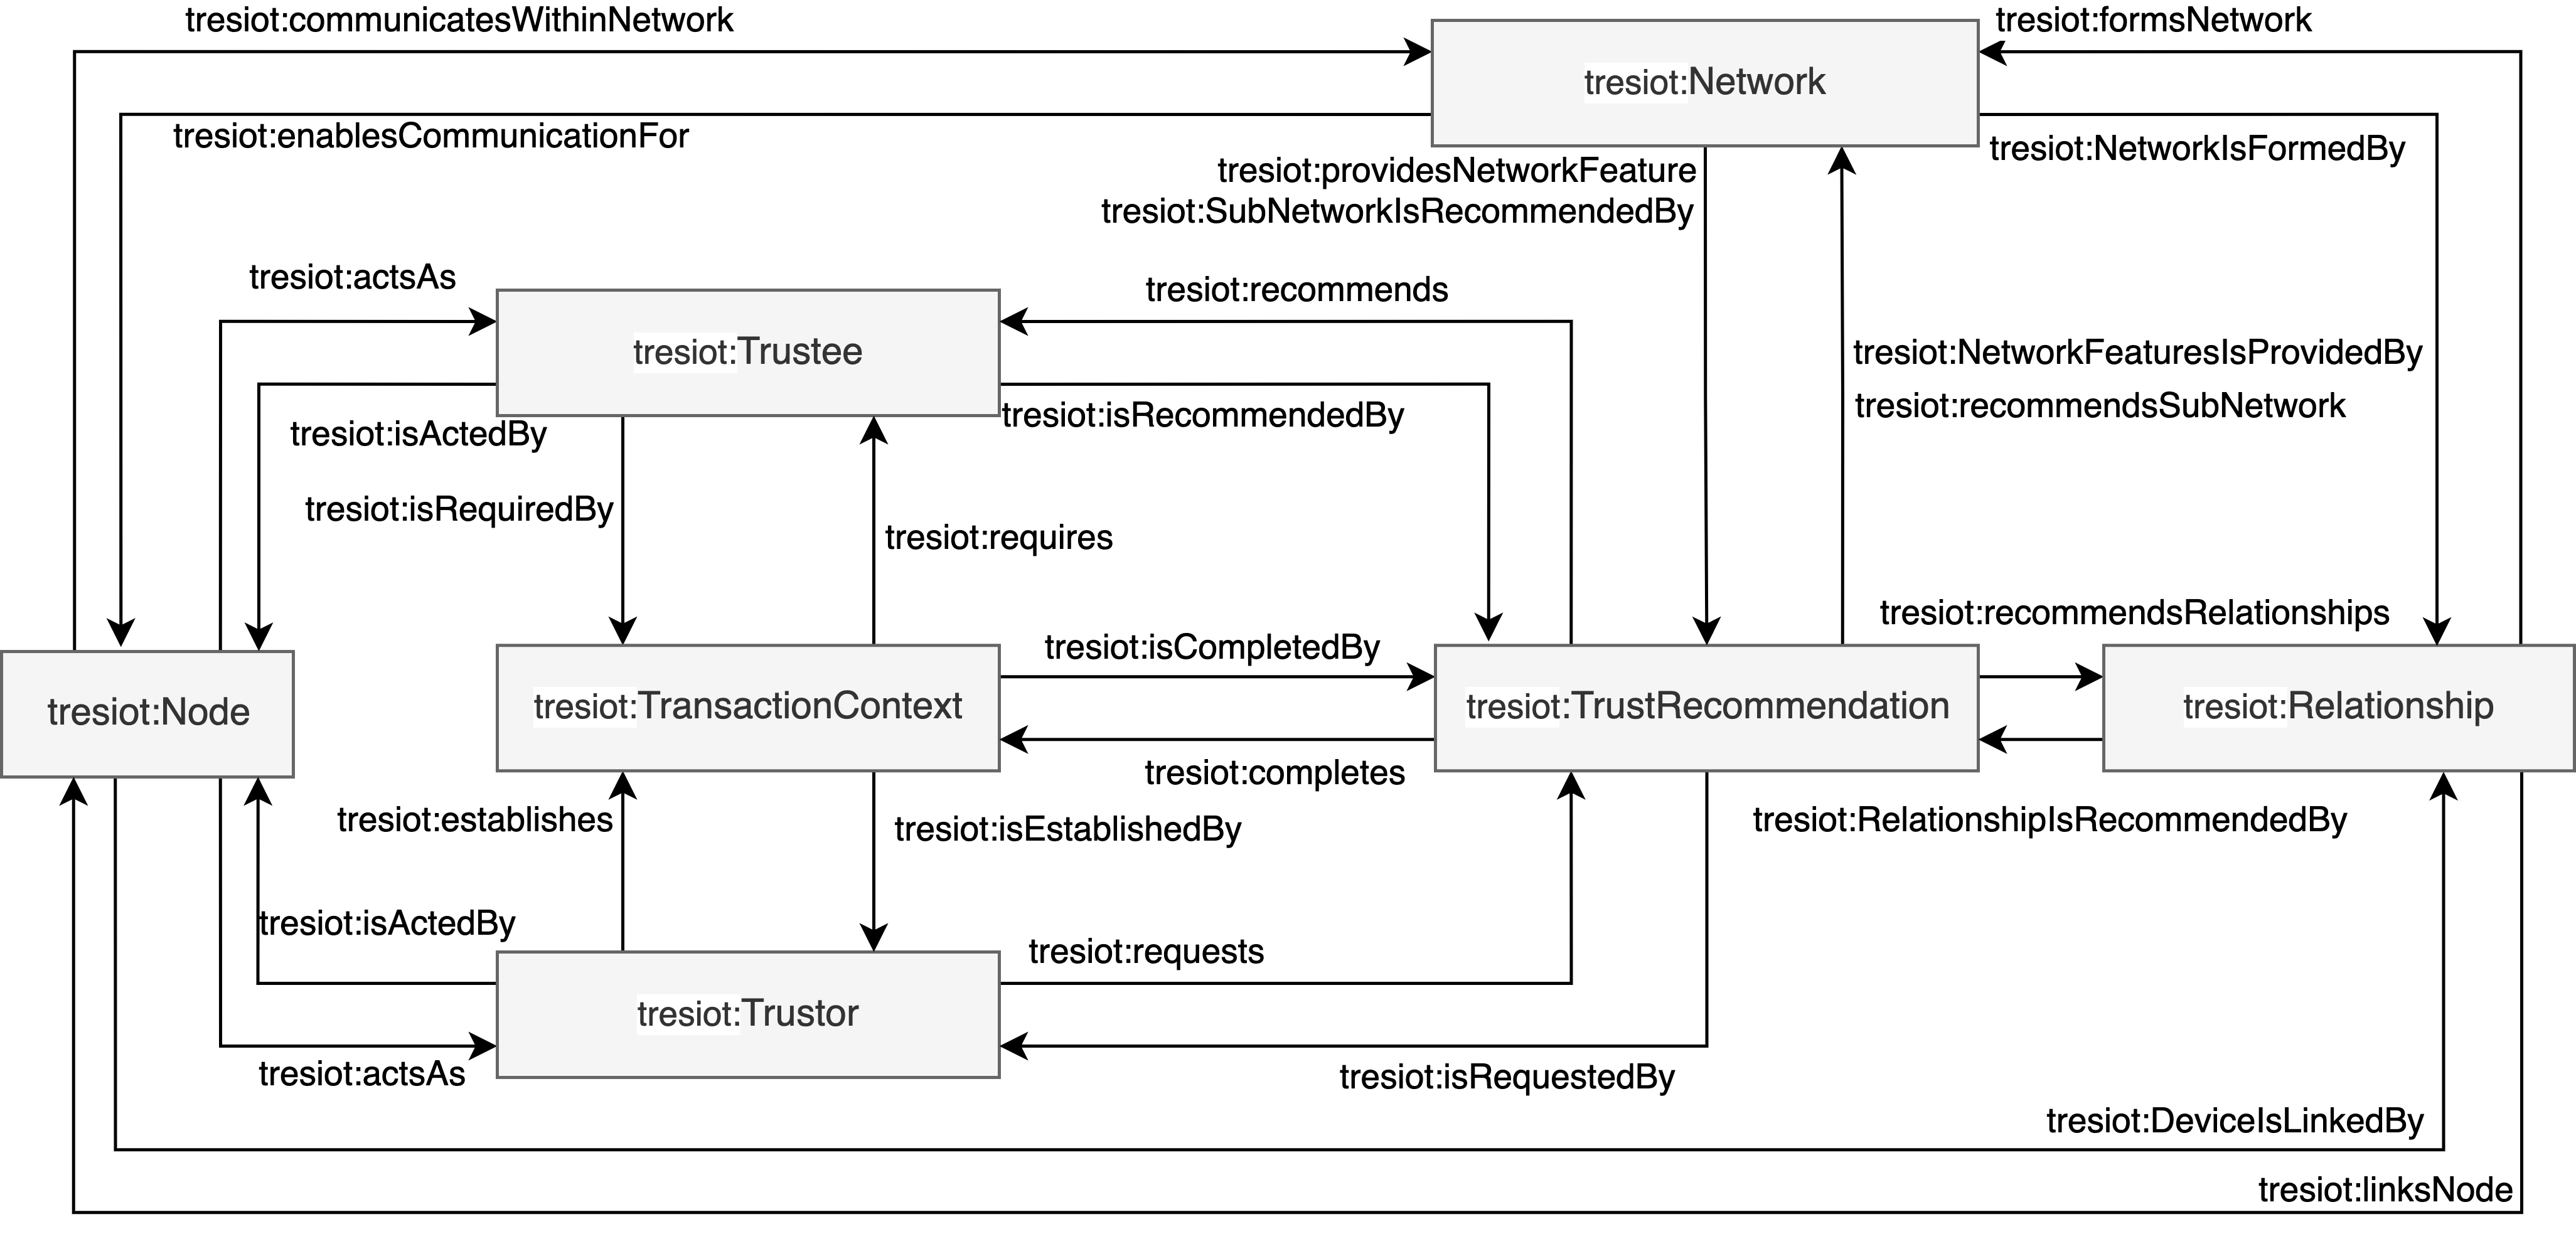 Key Composition of the TRESIOT ontology